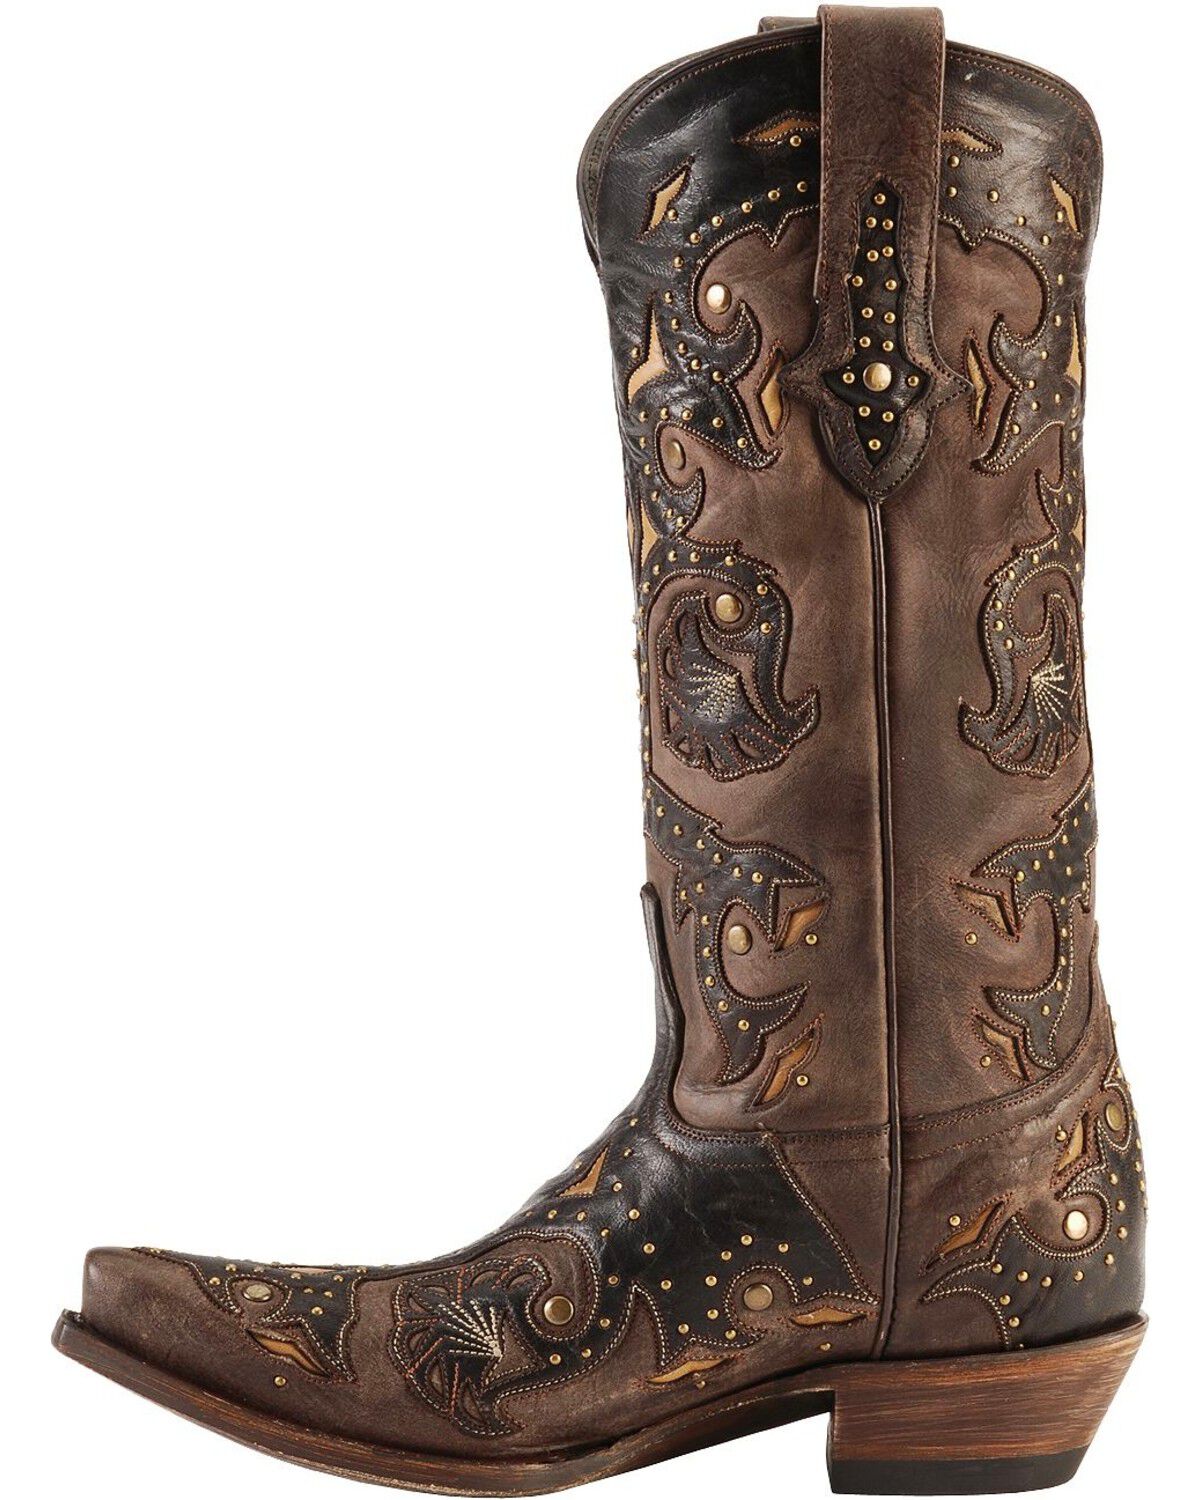 lucchese boot jack